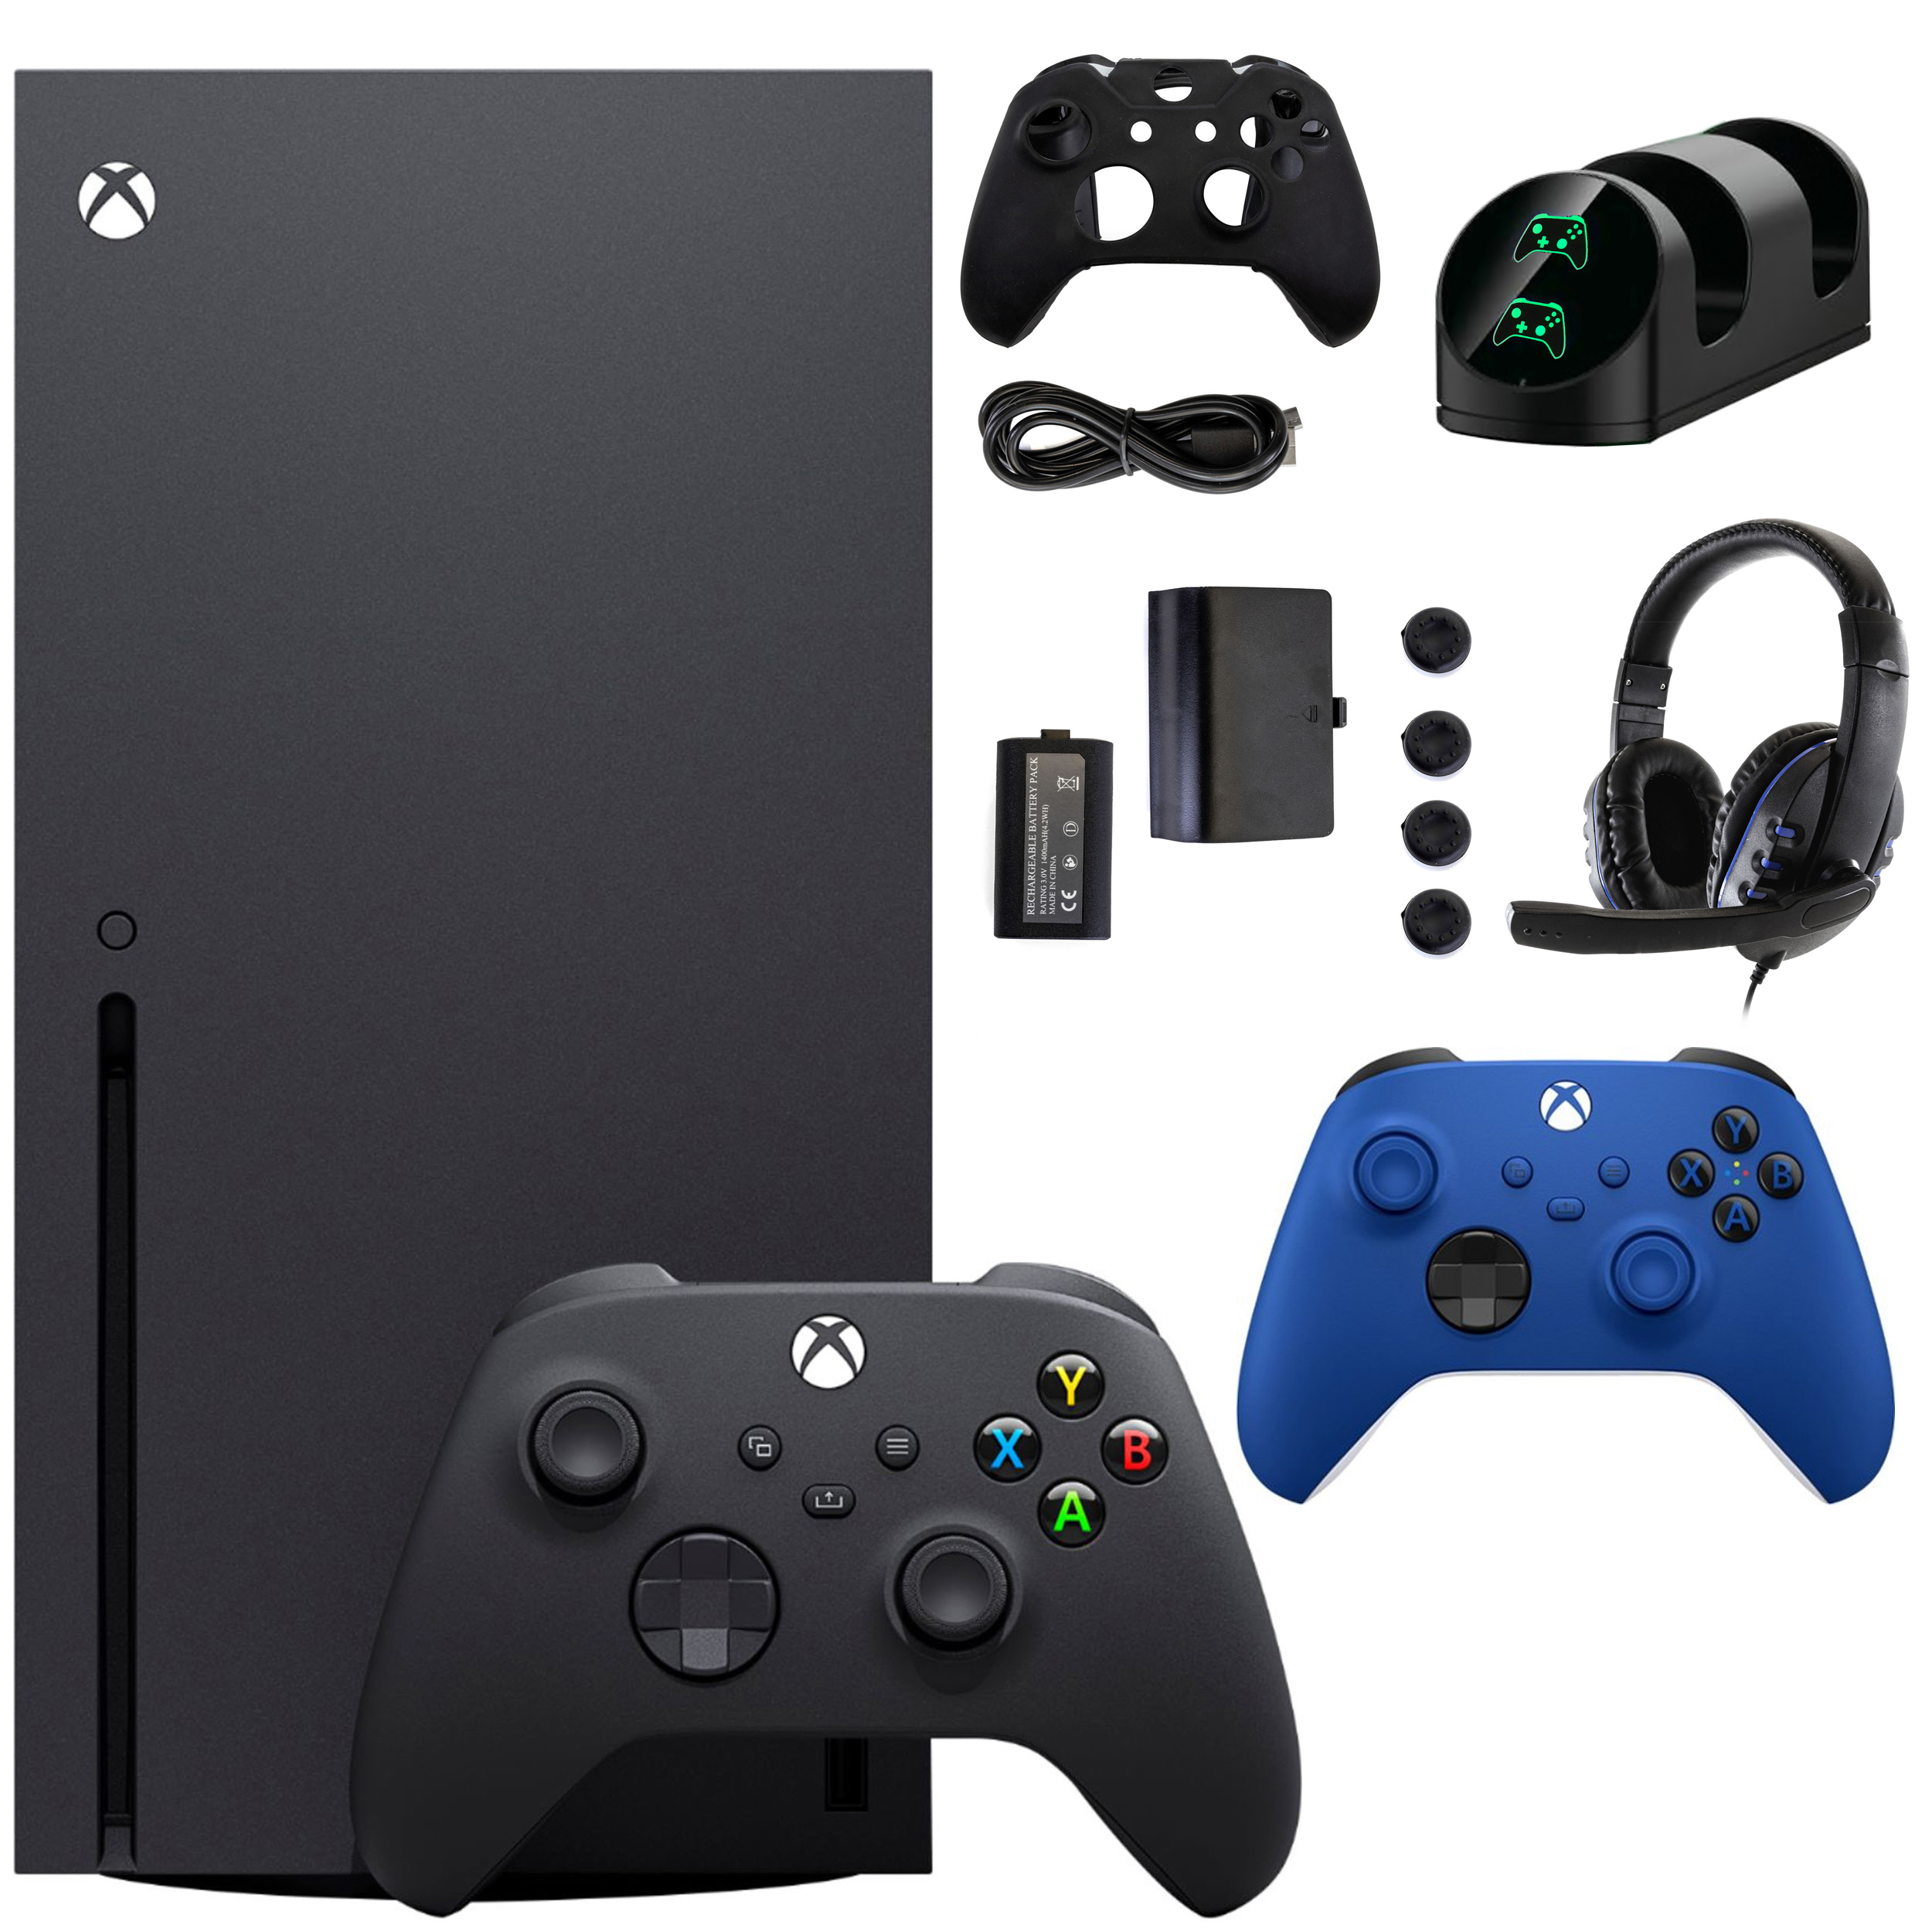 Microsoft Xbox Series X 1TB Console with Extra Blue Controller Accessories Kit